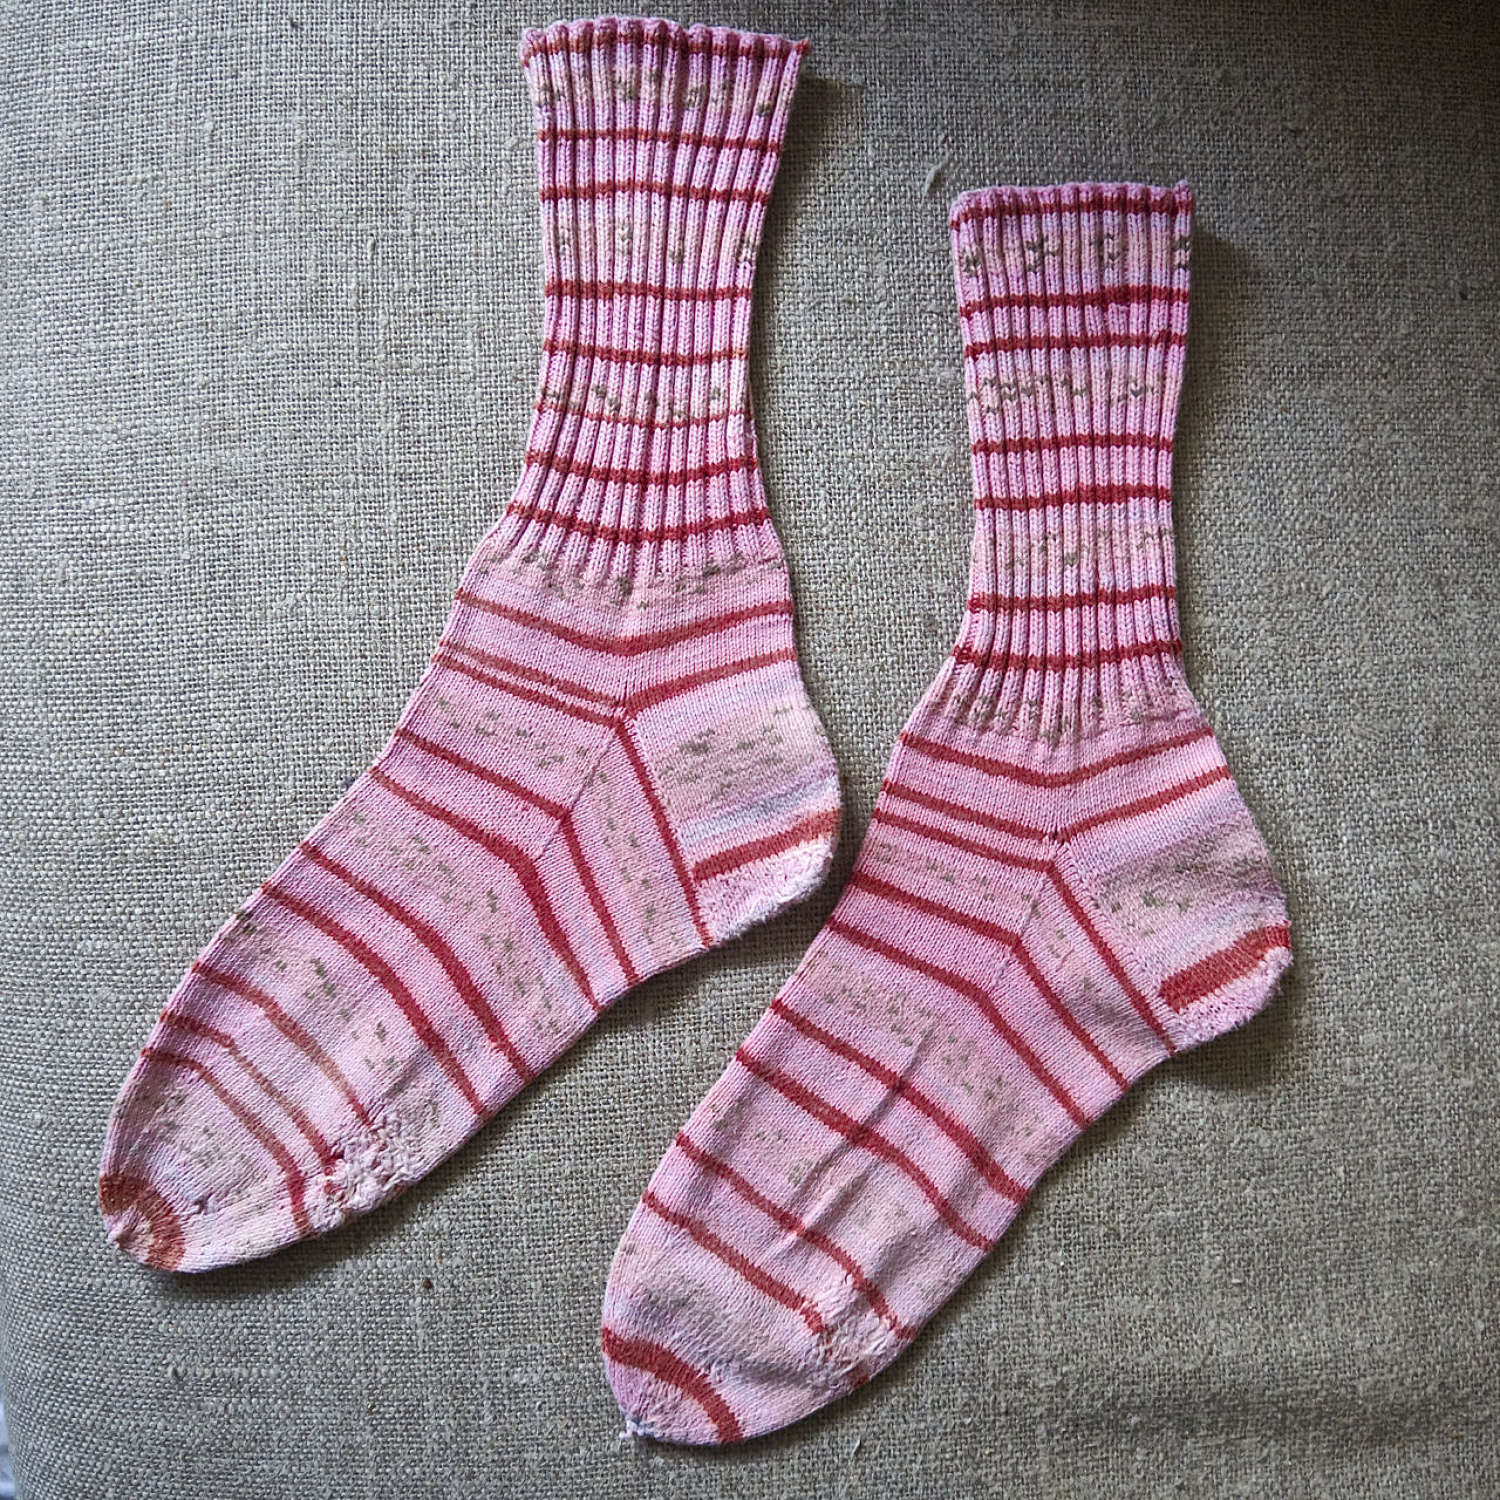 Pair of Striped Pink Handknitted Cotton Socks French 20th  Century